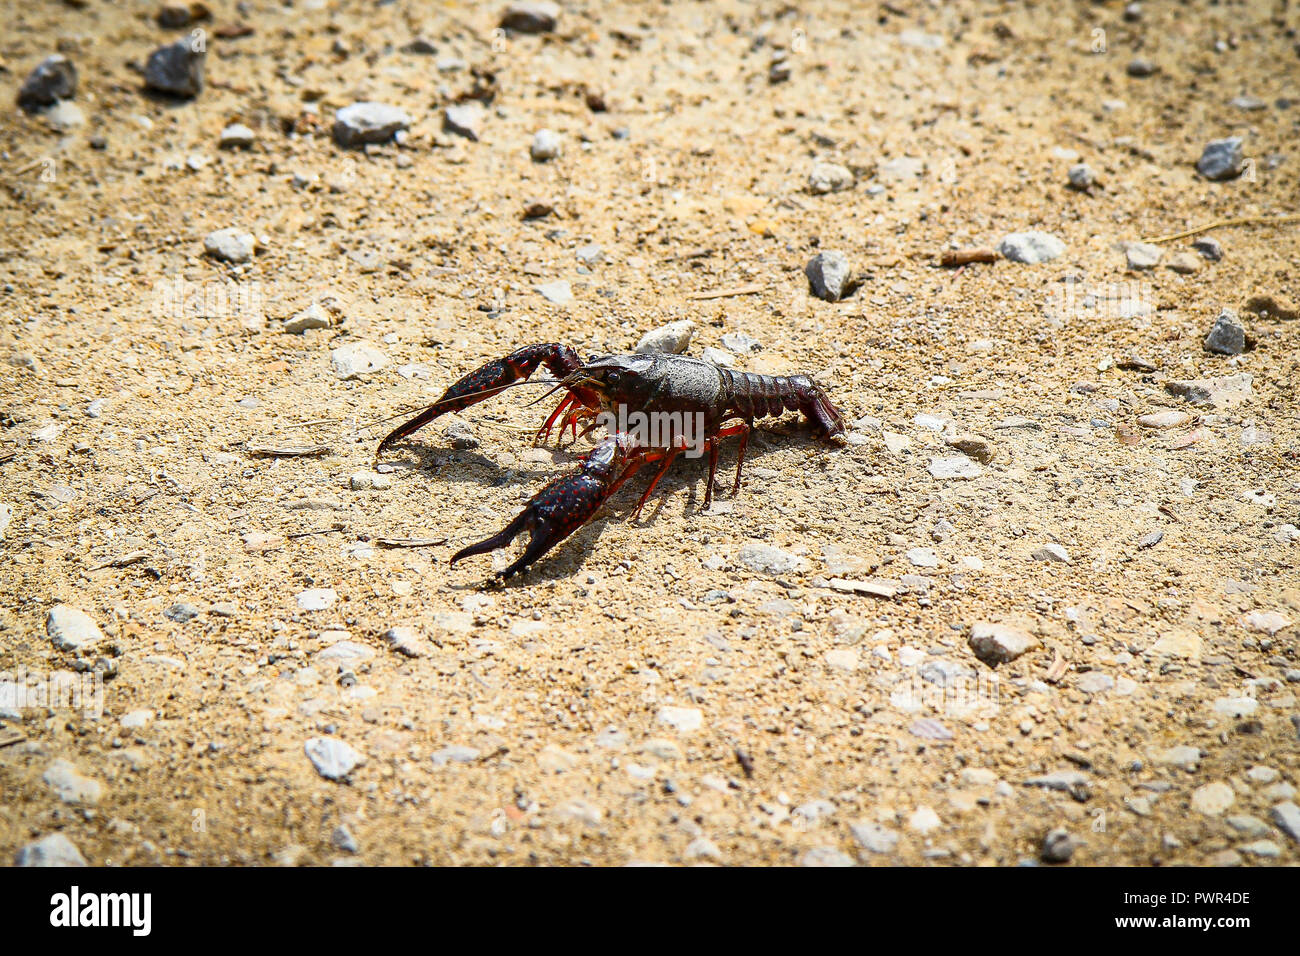 A crayfish crossing a gravel road, France Stock Photo